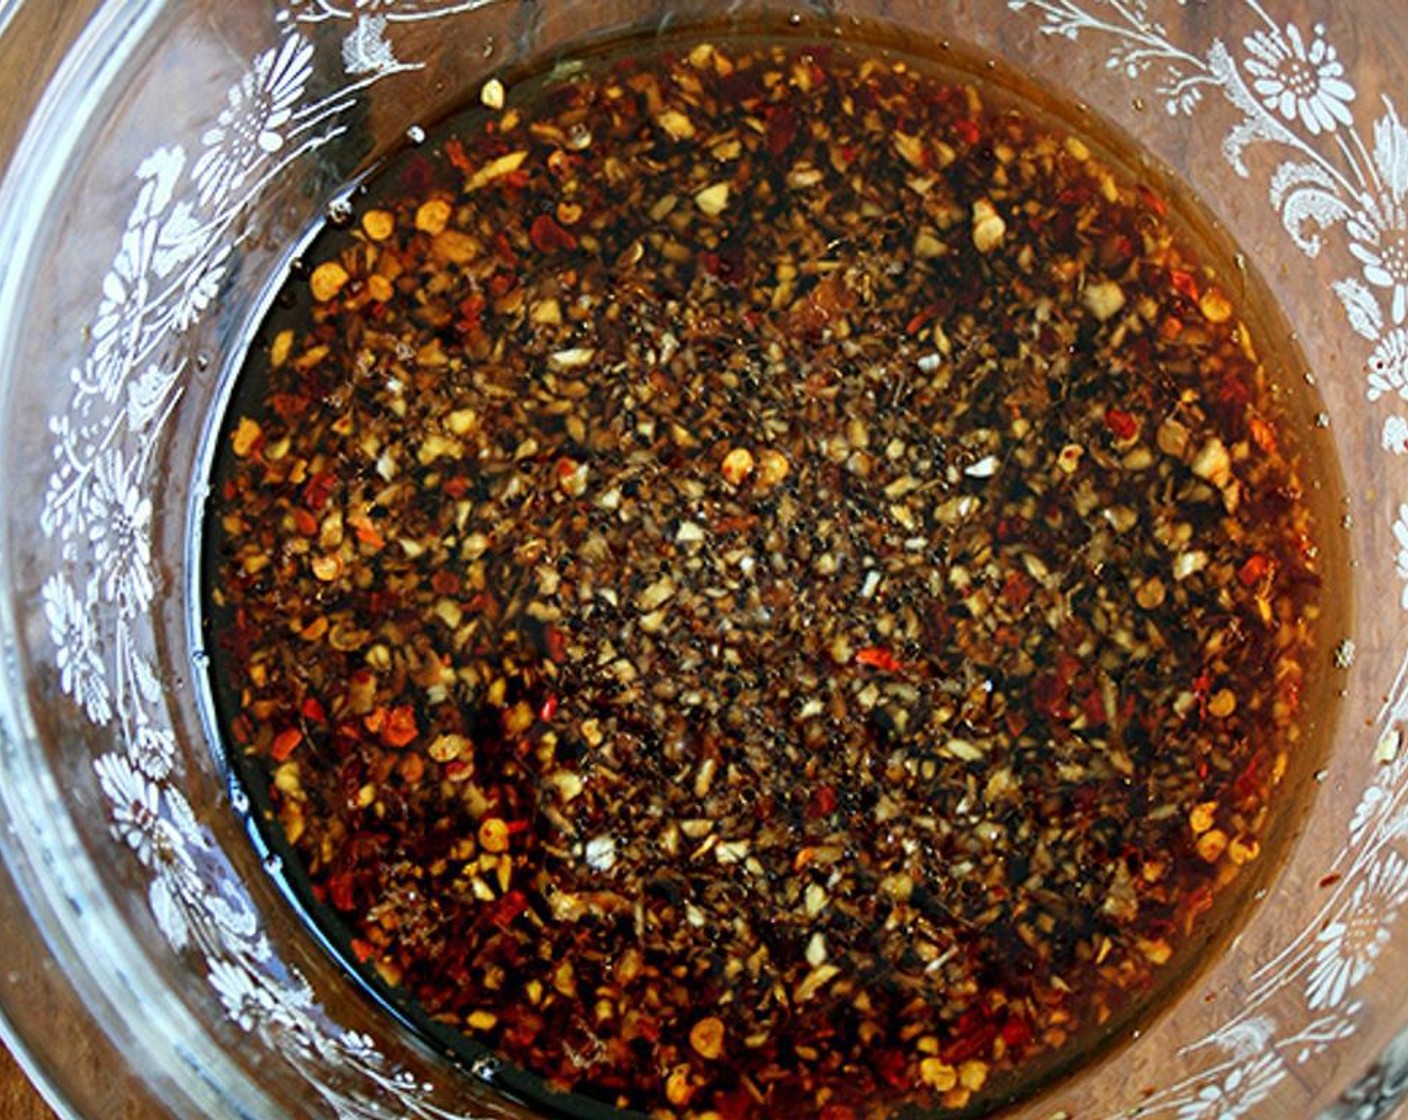 step 2 Add Granulated Sugar (1 tsp) and Crushed Red Pepper Flakes (1/4 tsp). Stir to combine. Taste. Add more sugar and/or crushed red pepper flakes to taste. If you wish, add a splash of Sriracha (to taste). You can always add the Sriracha directly to the noodle salad, too.